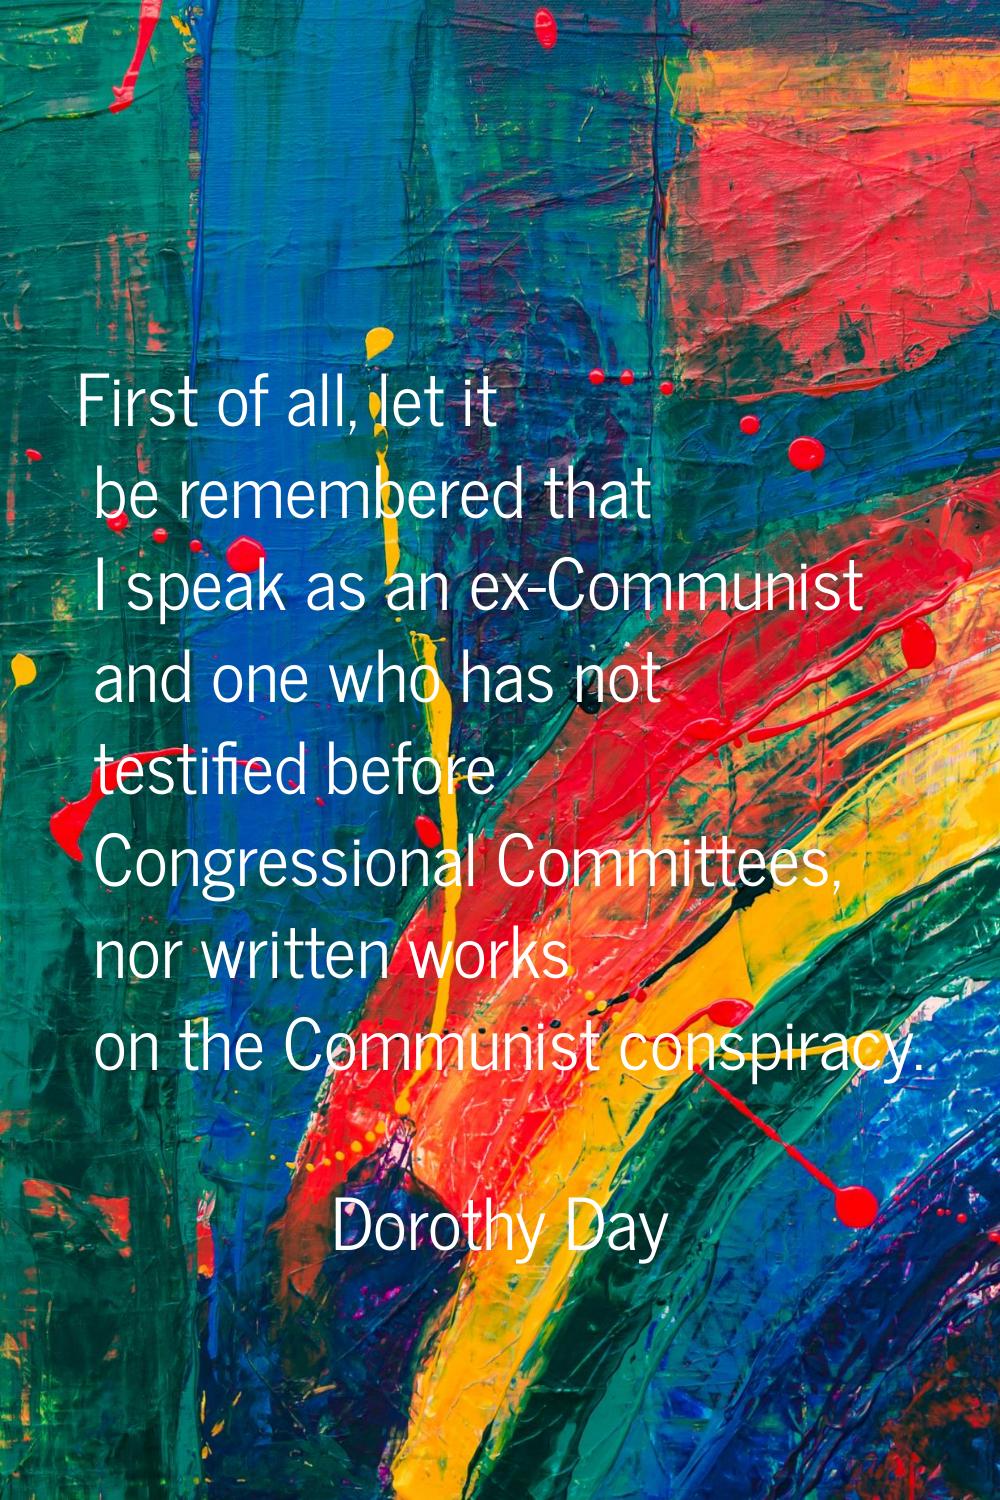 First of all, let it be remembered that I speak as an ex-Communist and one who has not testified be